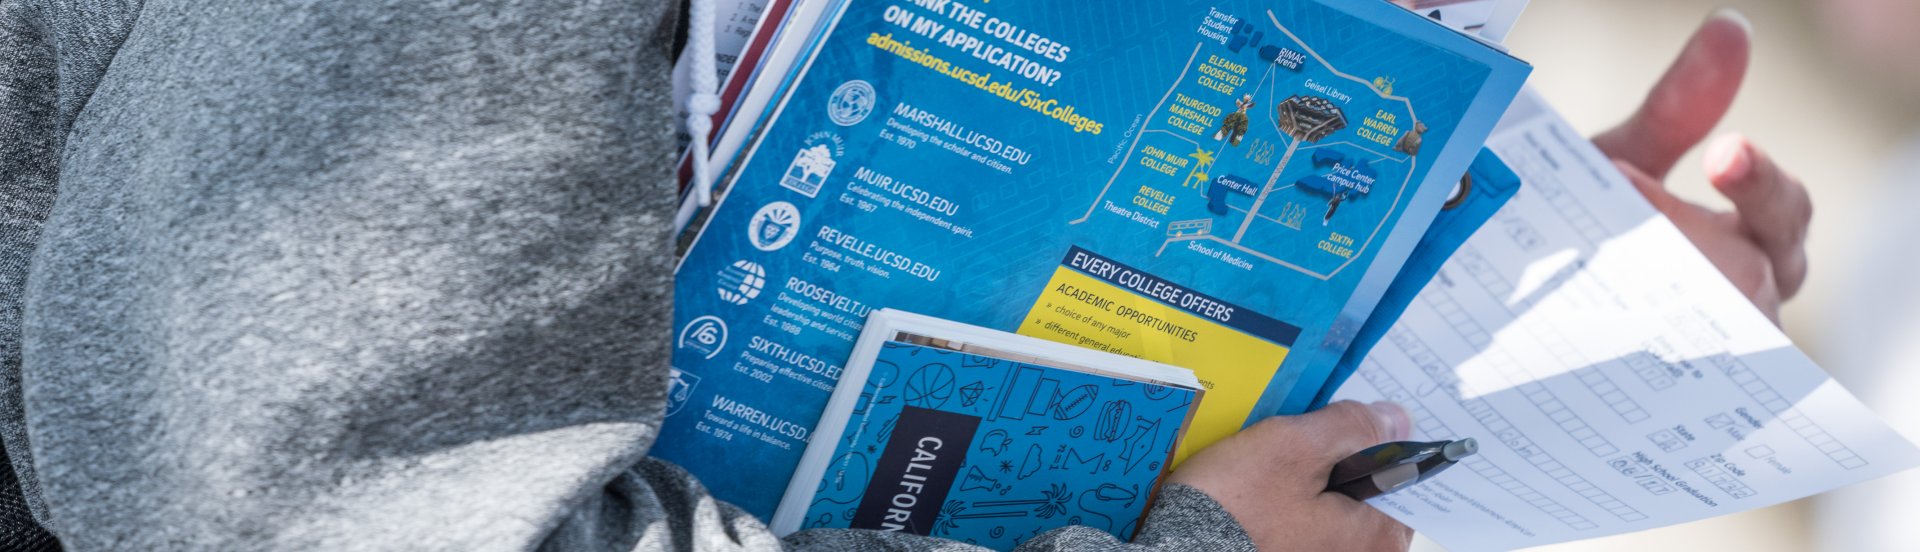 student holding a stack of brochures from the college transfer fair 